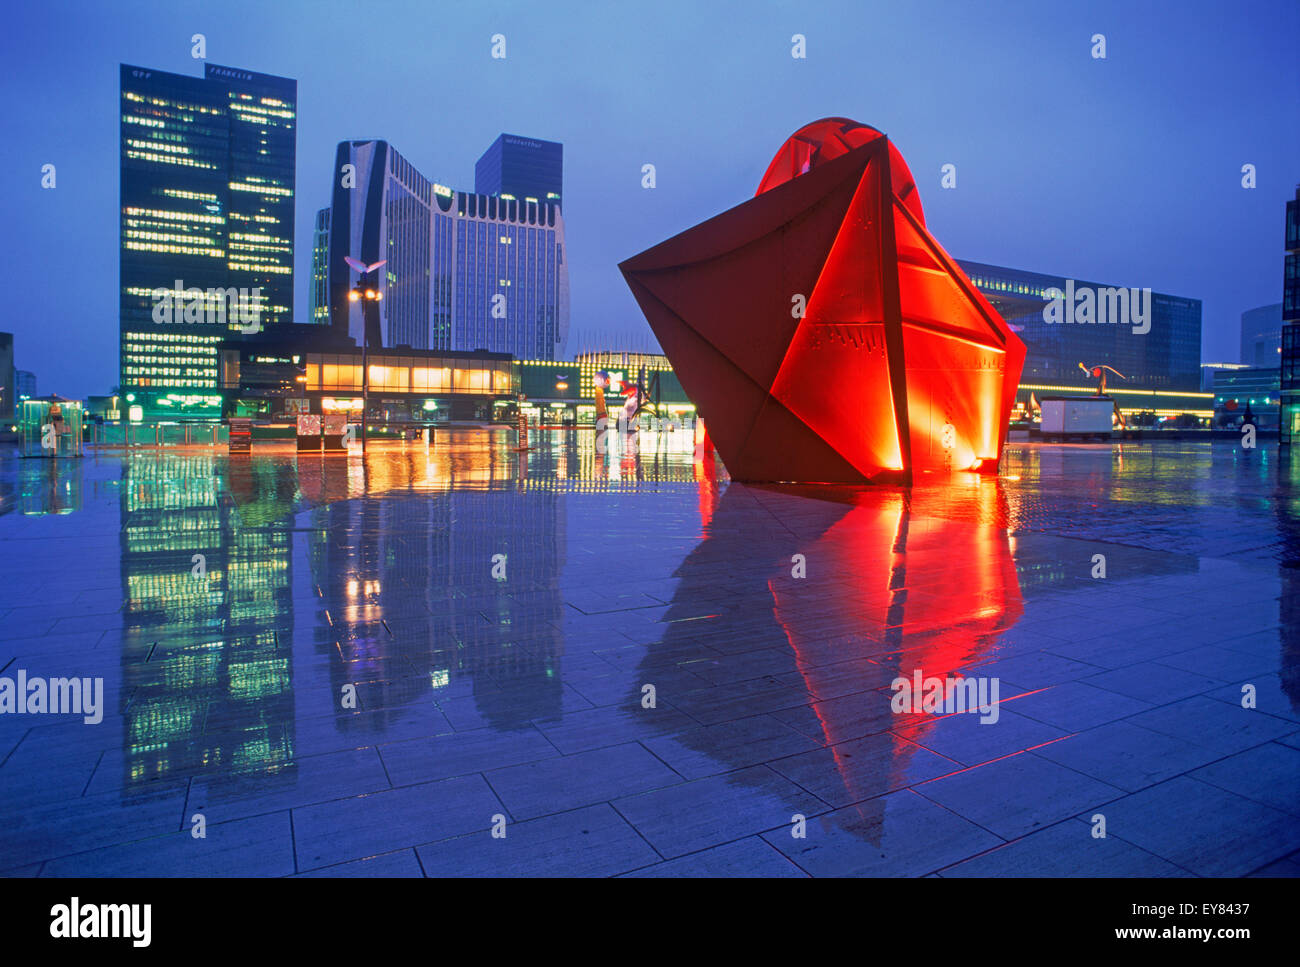 The Arch and modern sculptures at La Defense reflecting of wet surface on rainy night Stock Photo